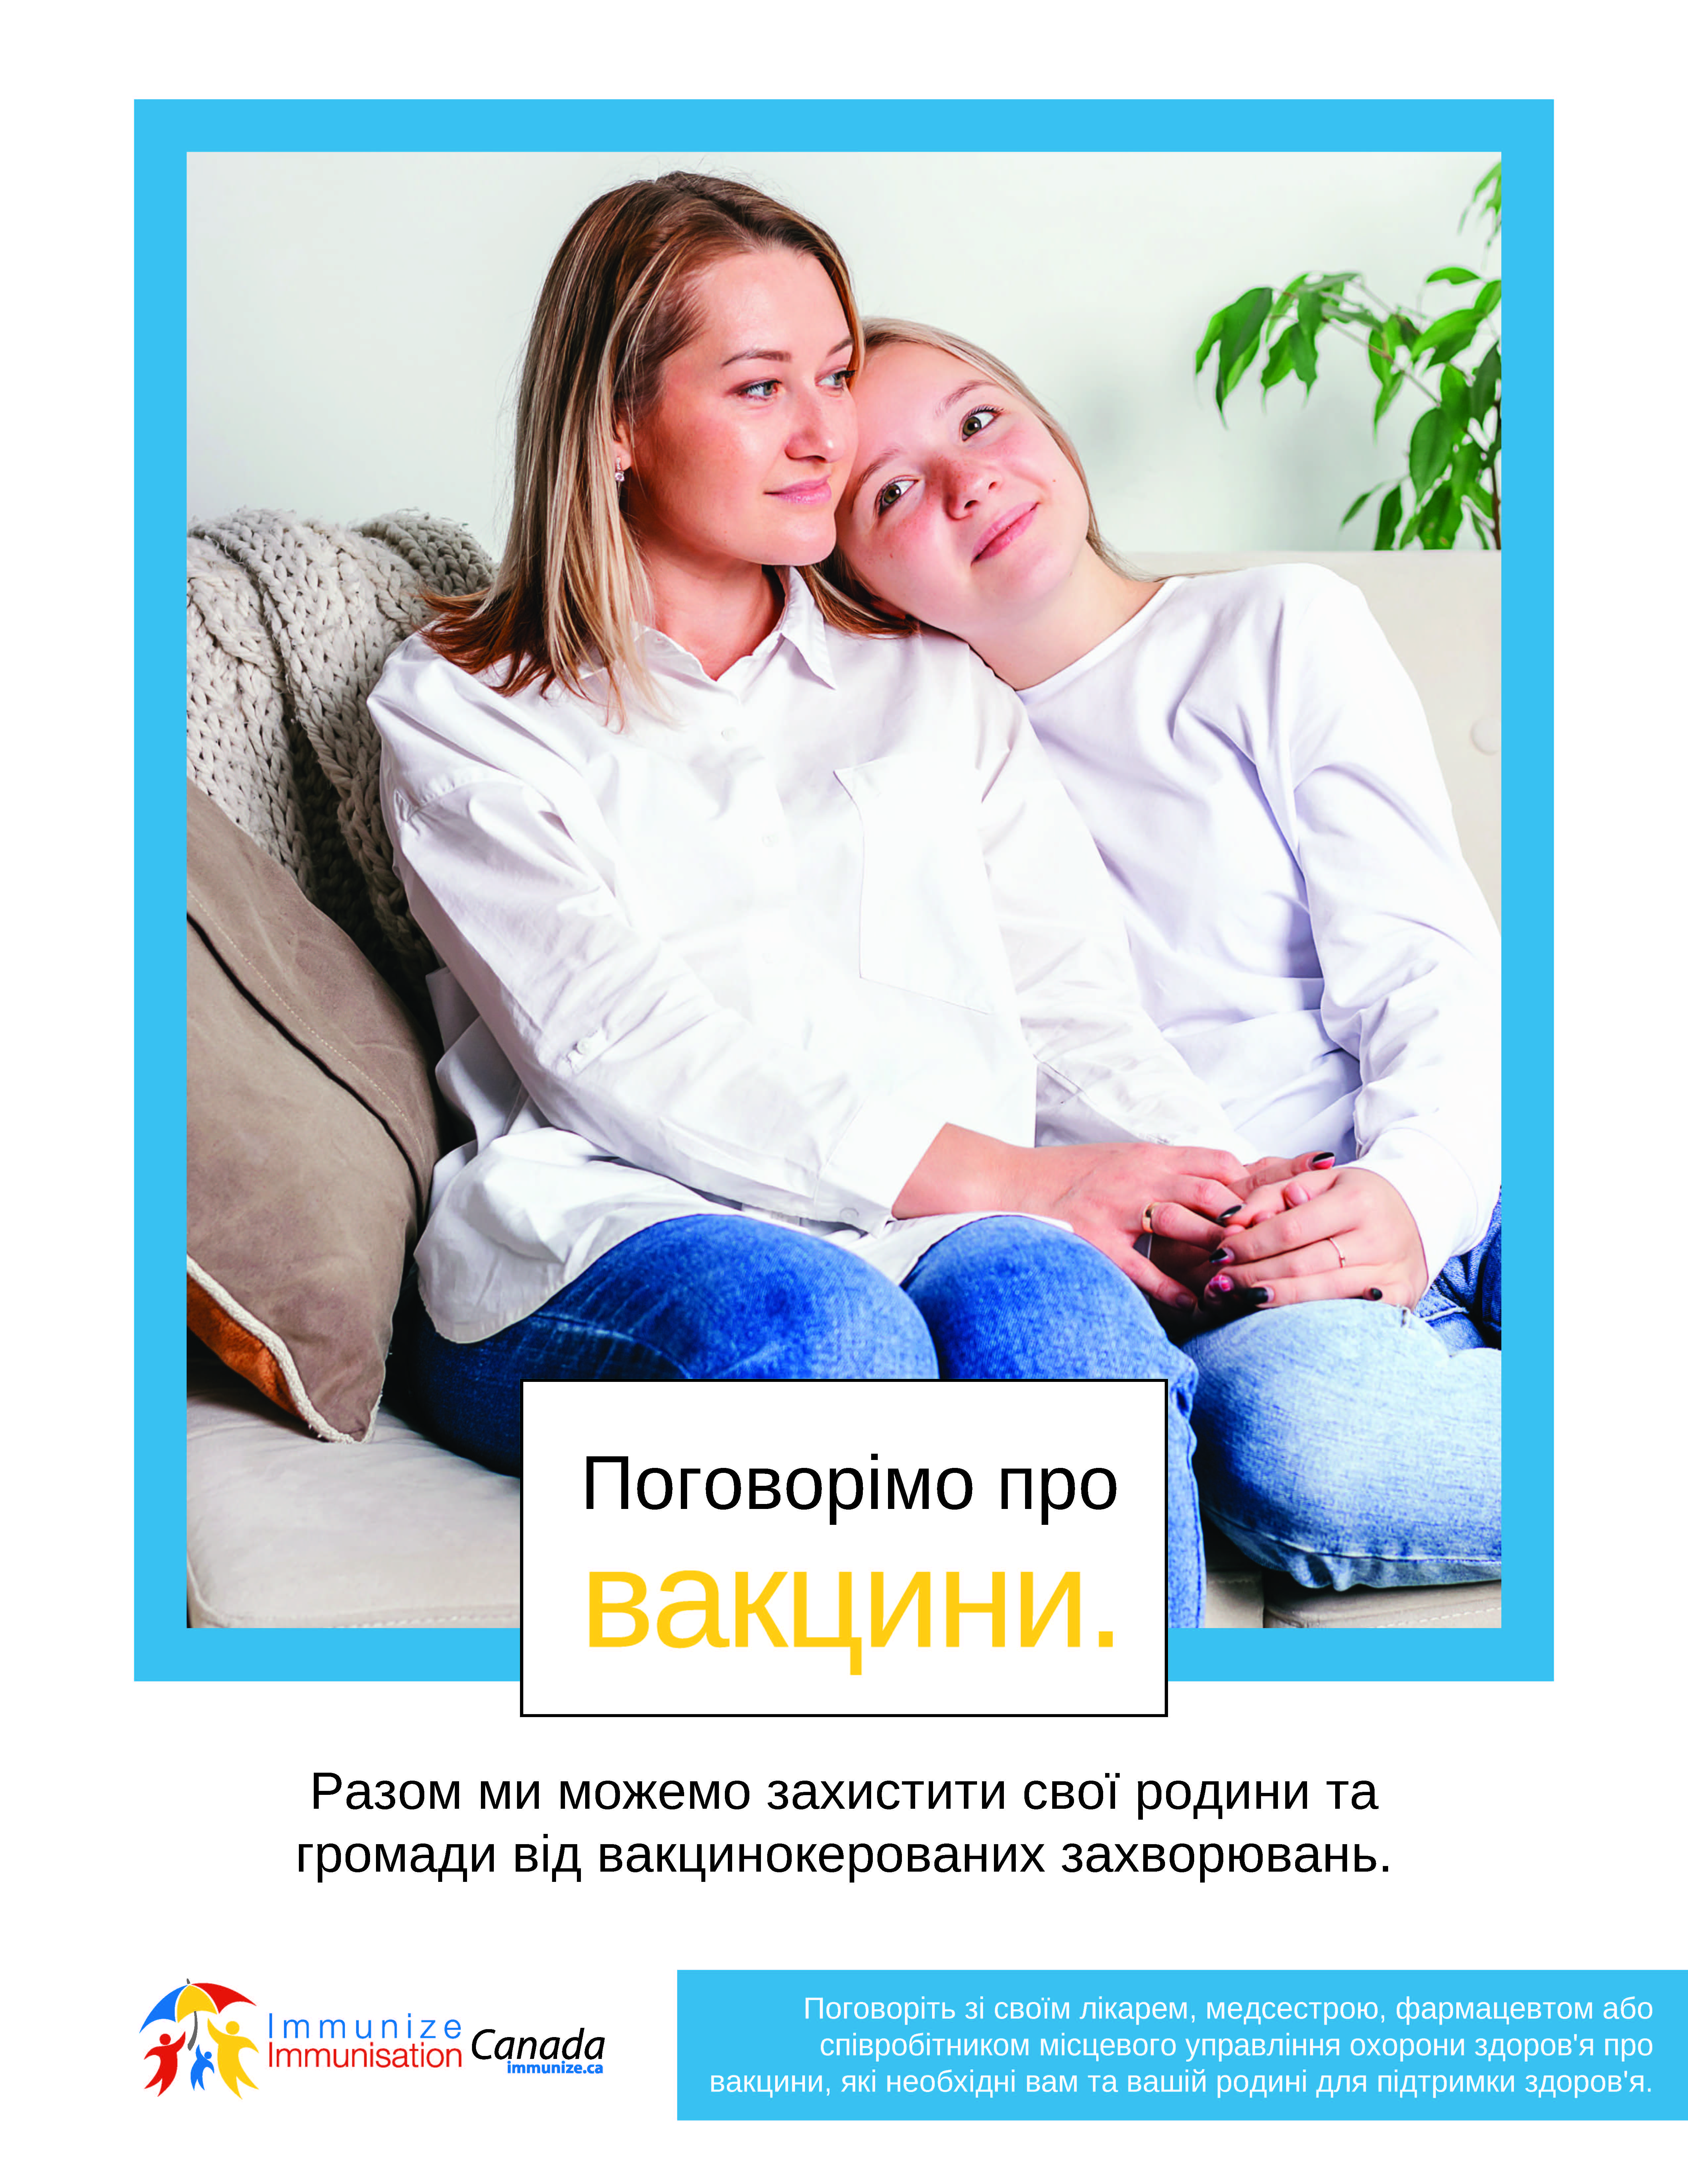 Let's talk about vaccines - poster in Ukrainian